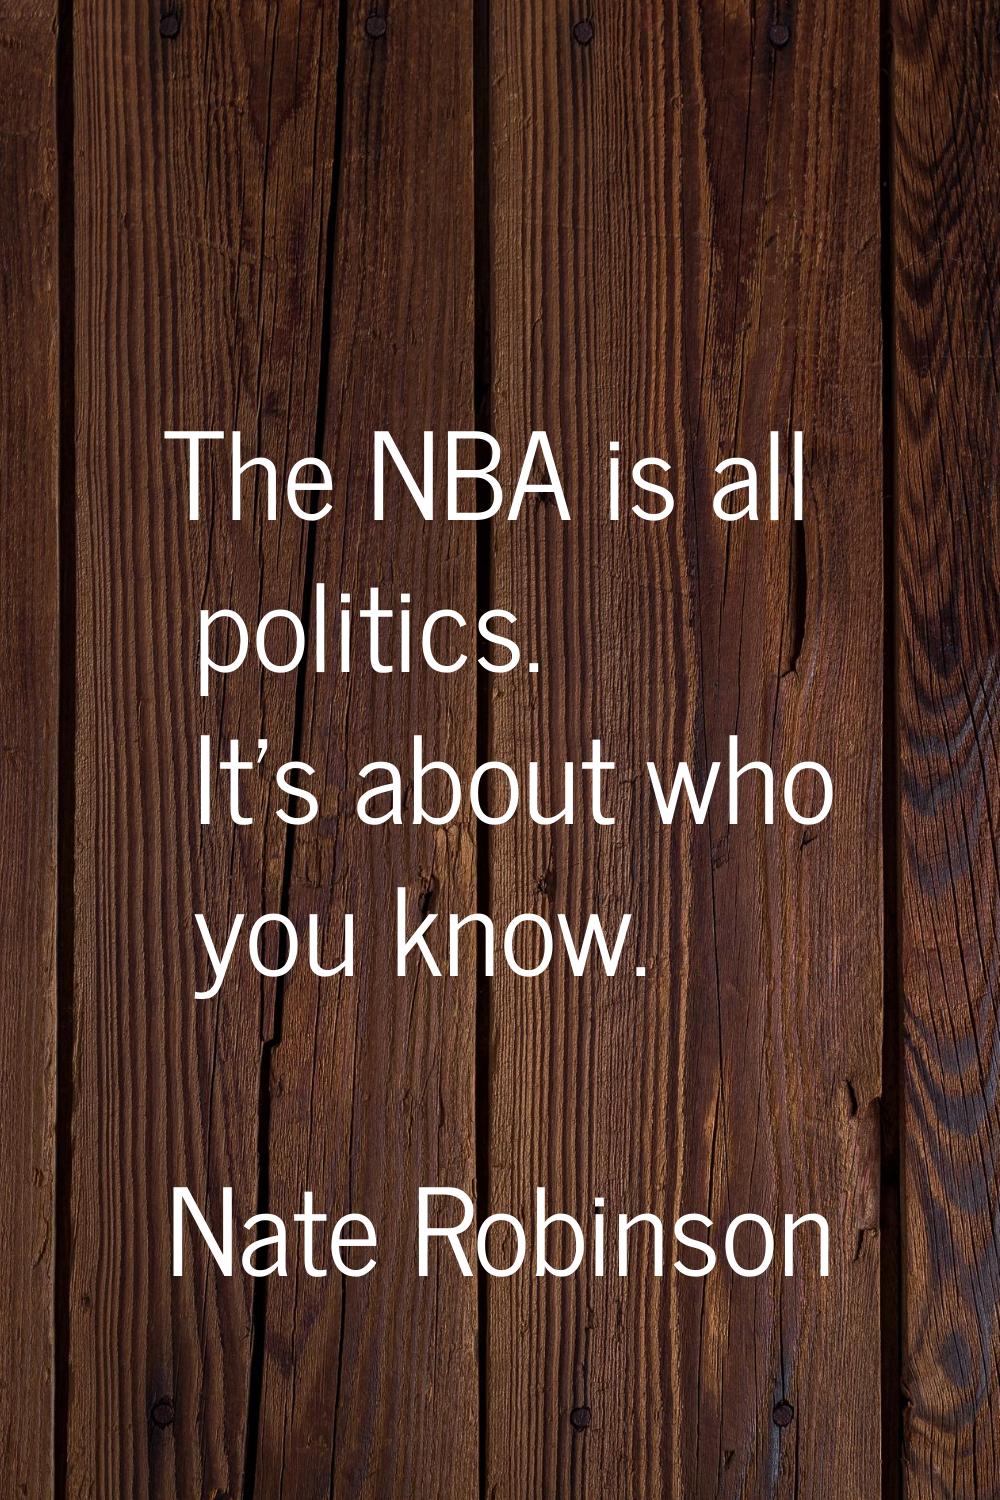 The NBA is all politics. It's about who you know.